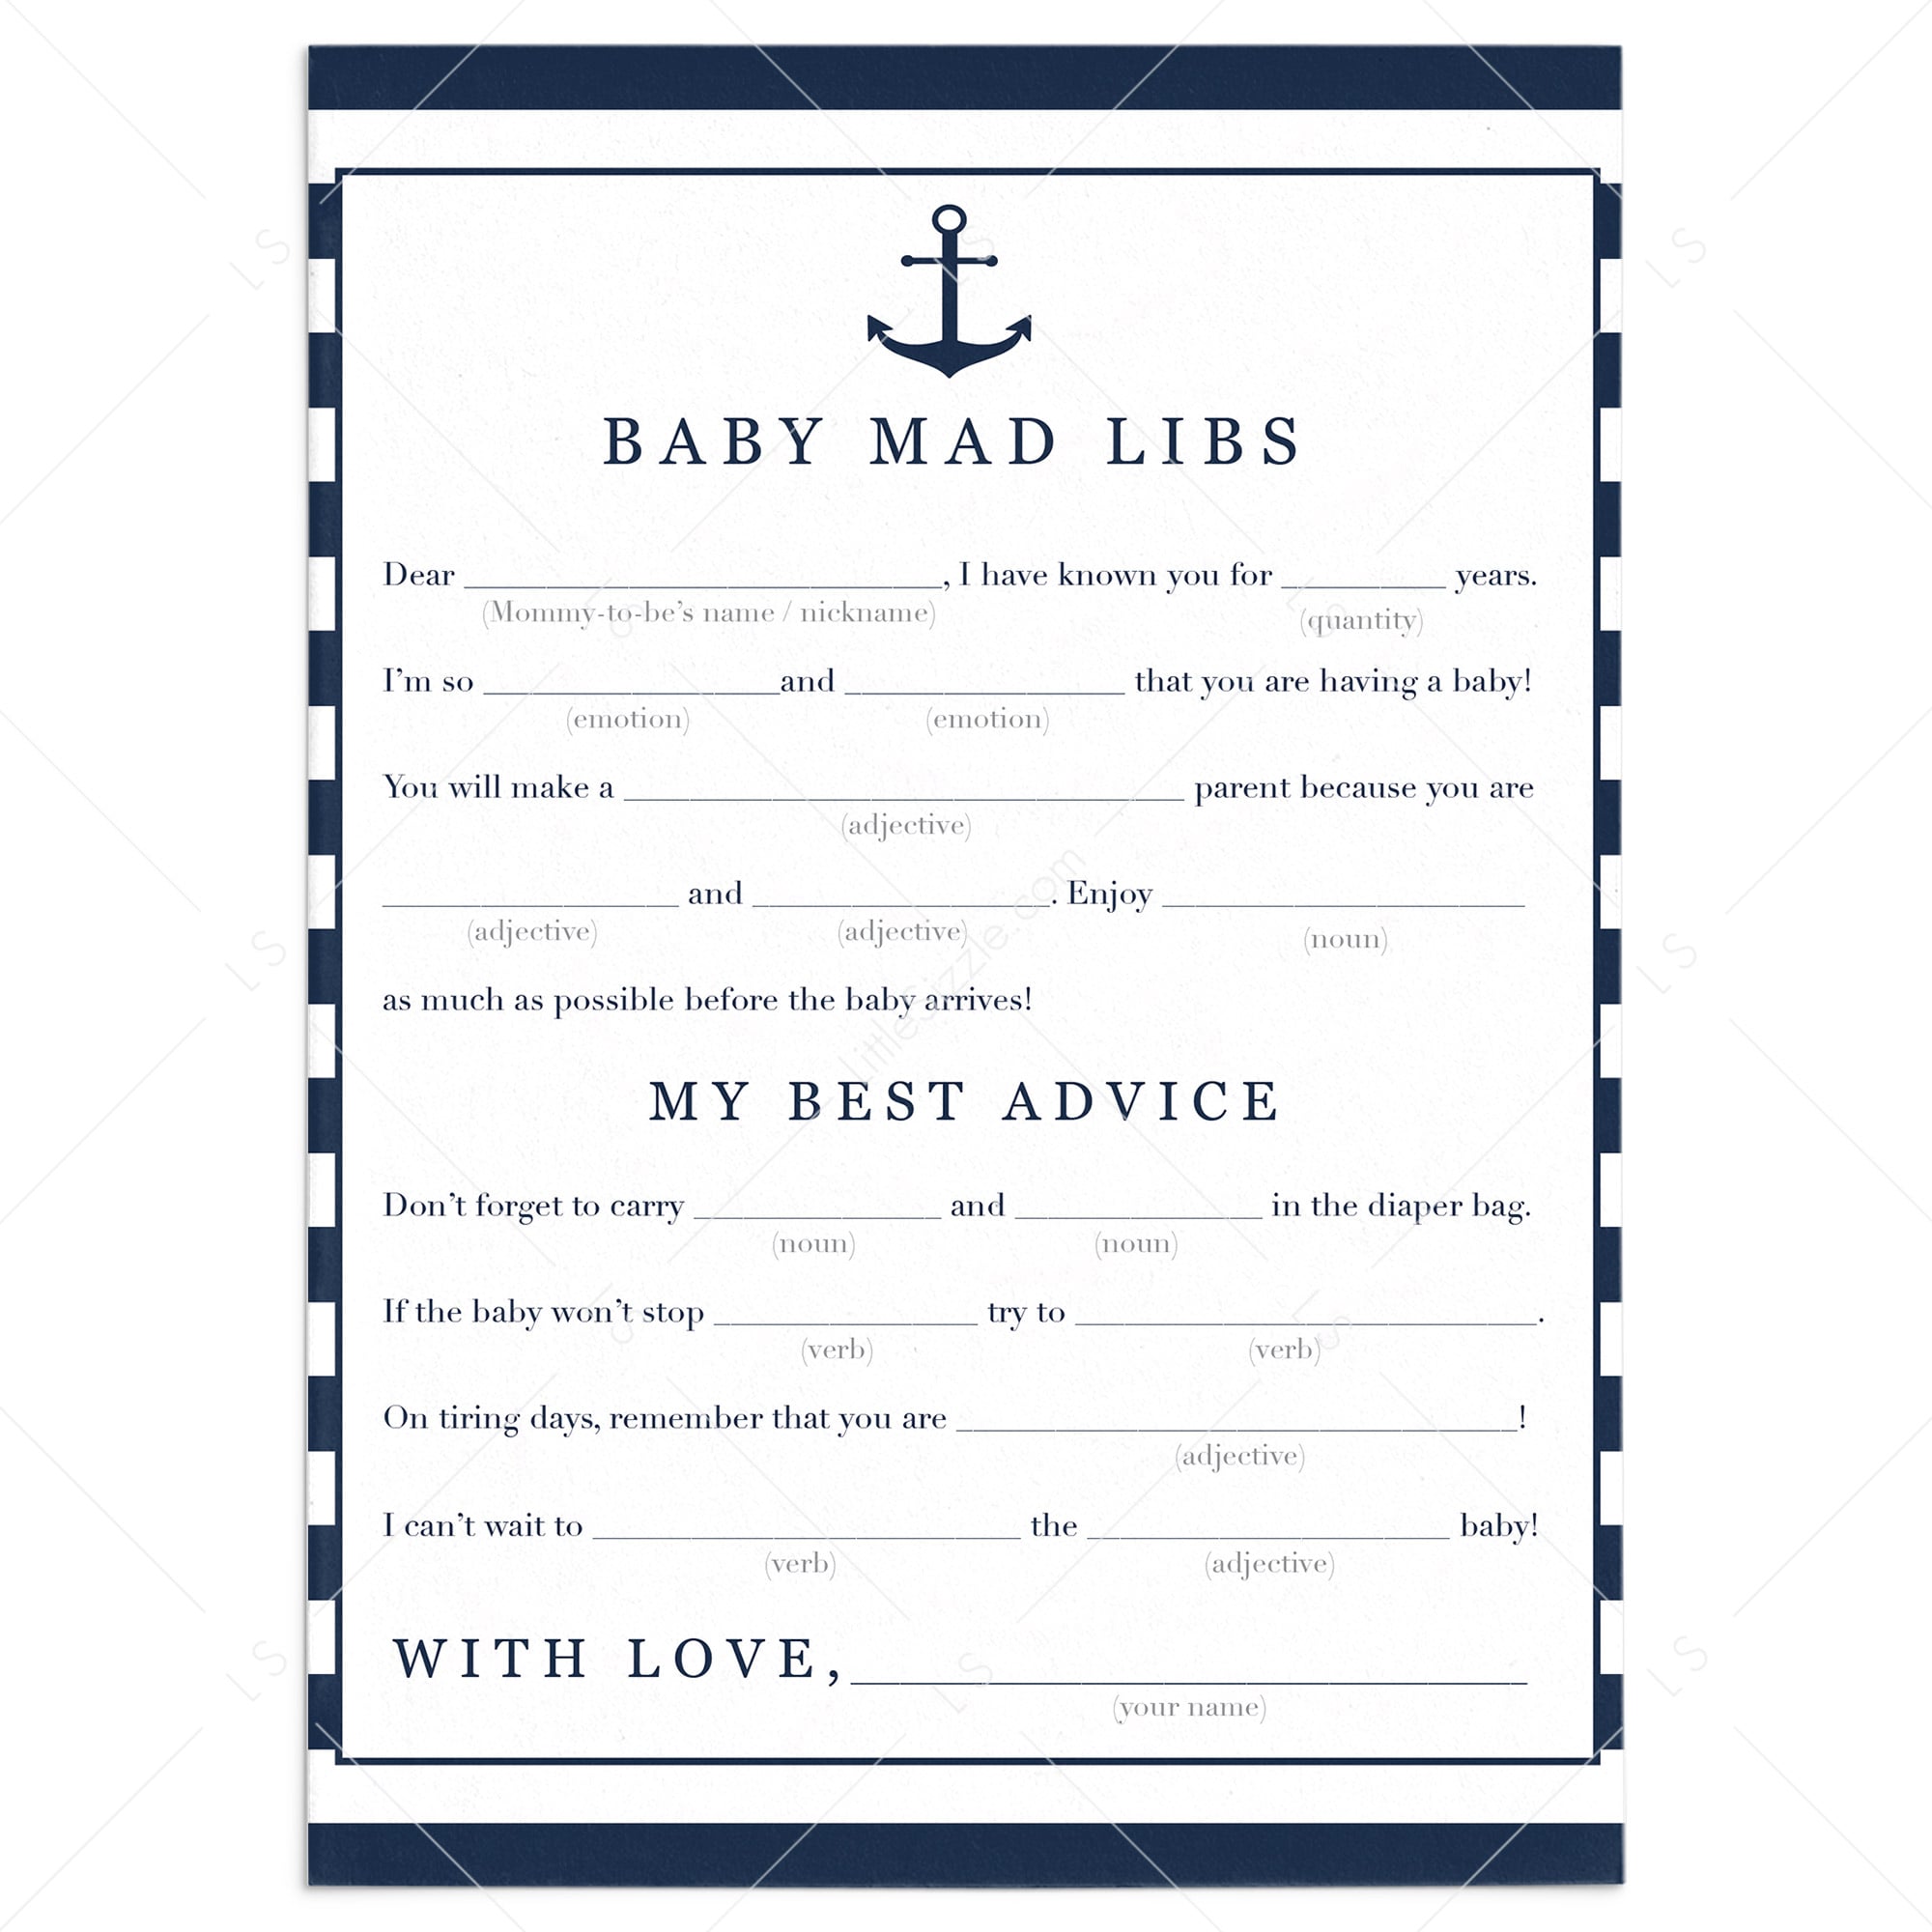 Nautical baby shower games baby mad libs advice cards by LittleSizzle